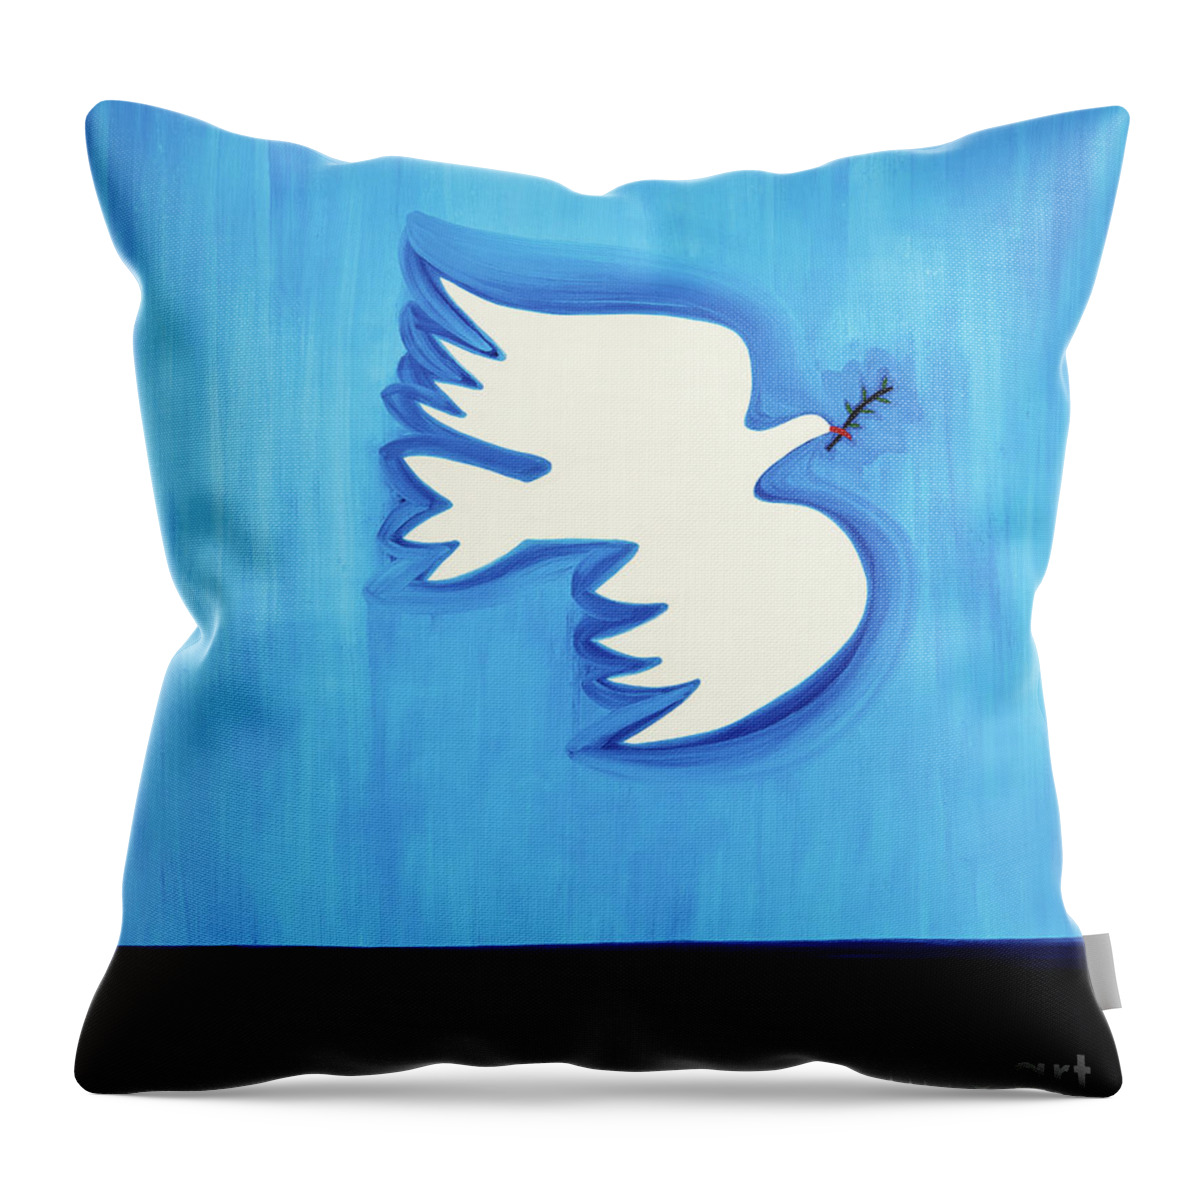 Dove With Leaf Throw Pillow featuring the painting Dove With Leaf by Cristina Rodriguez